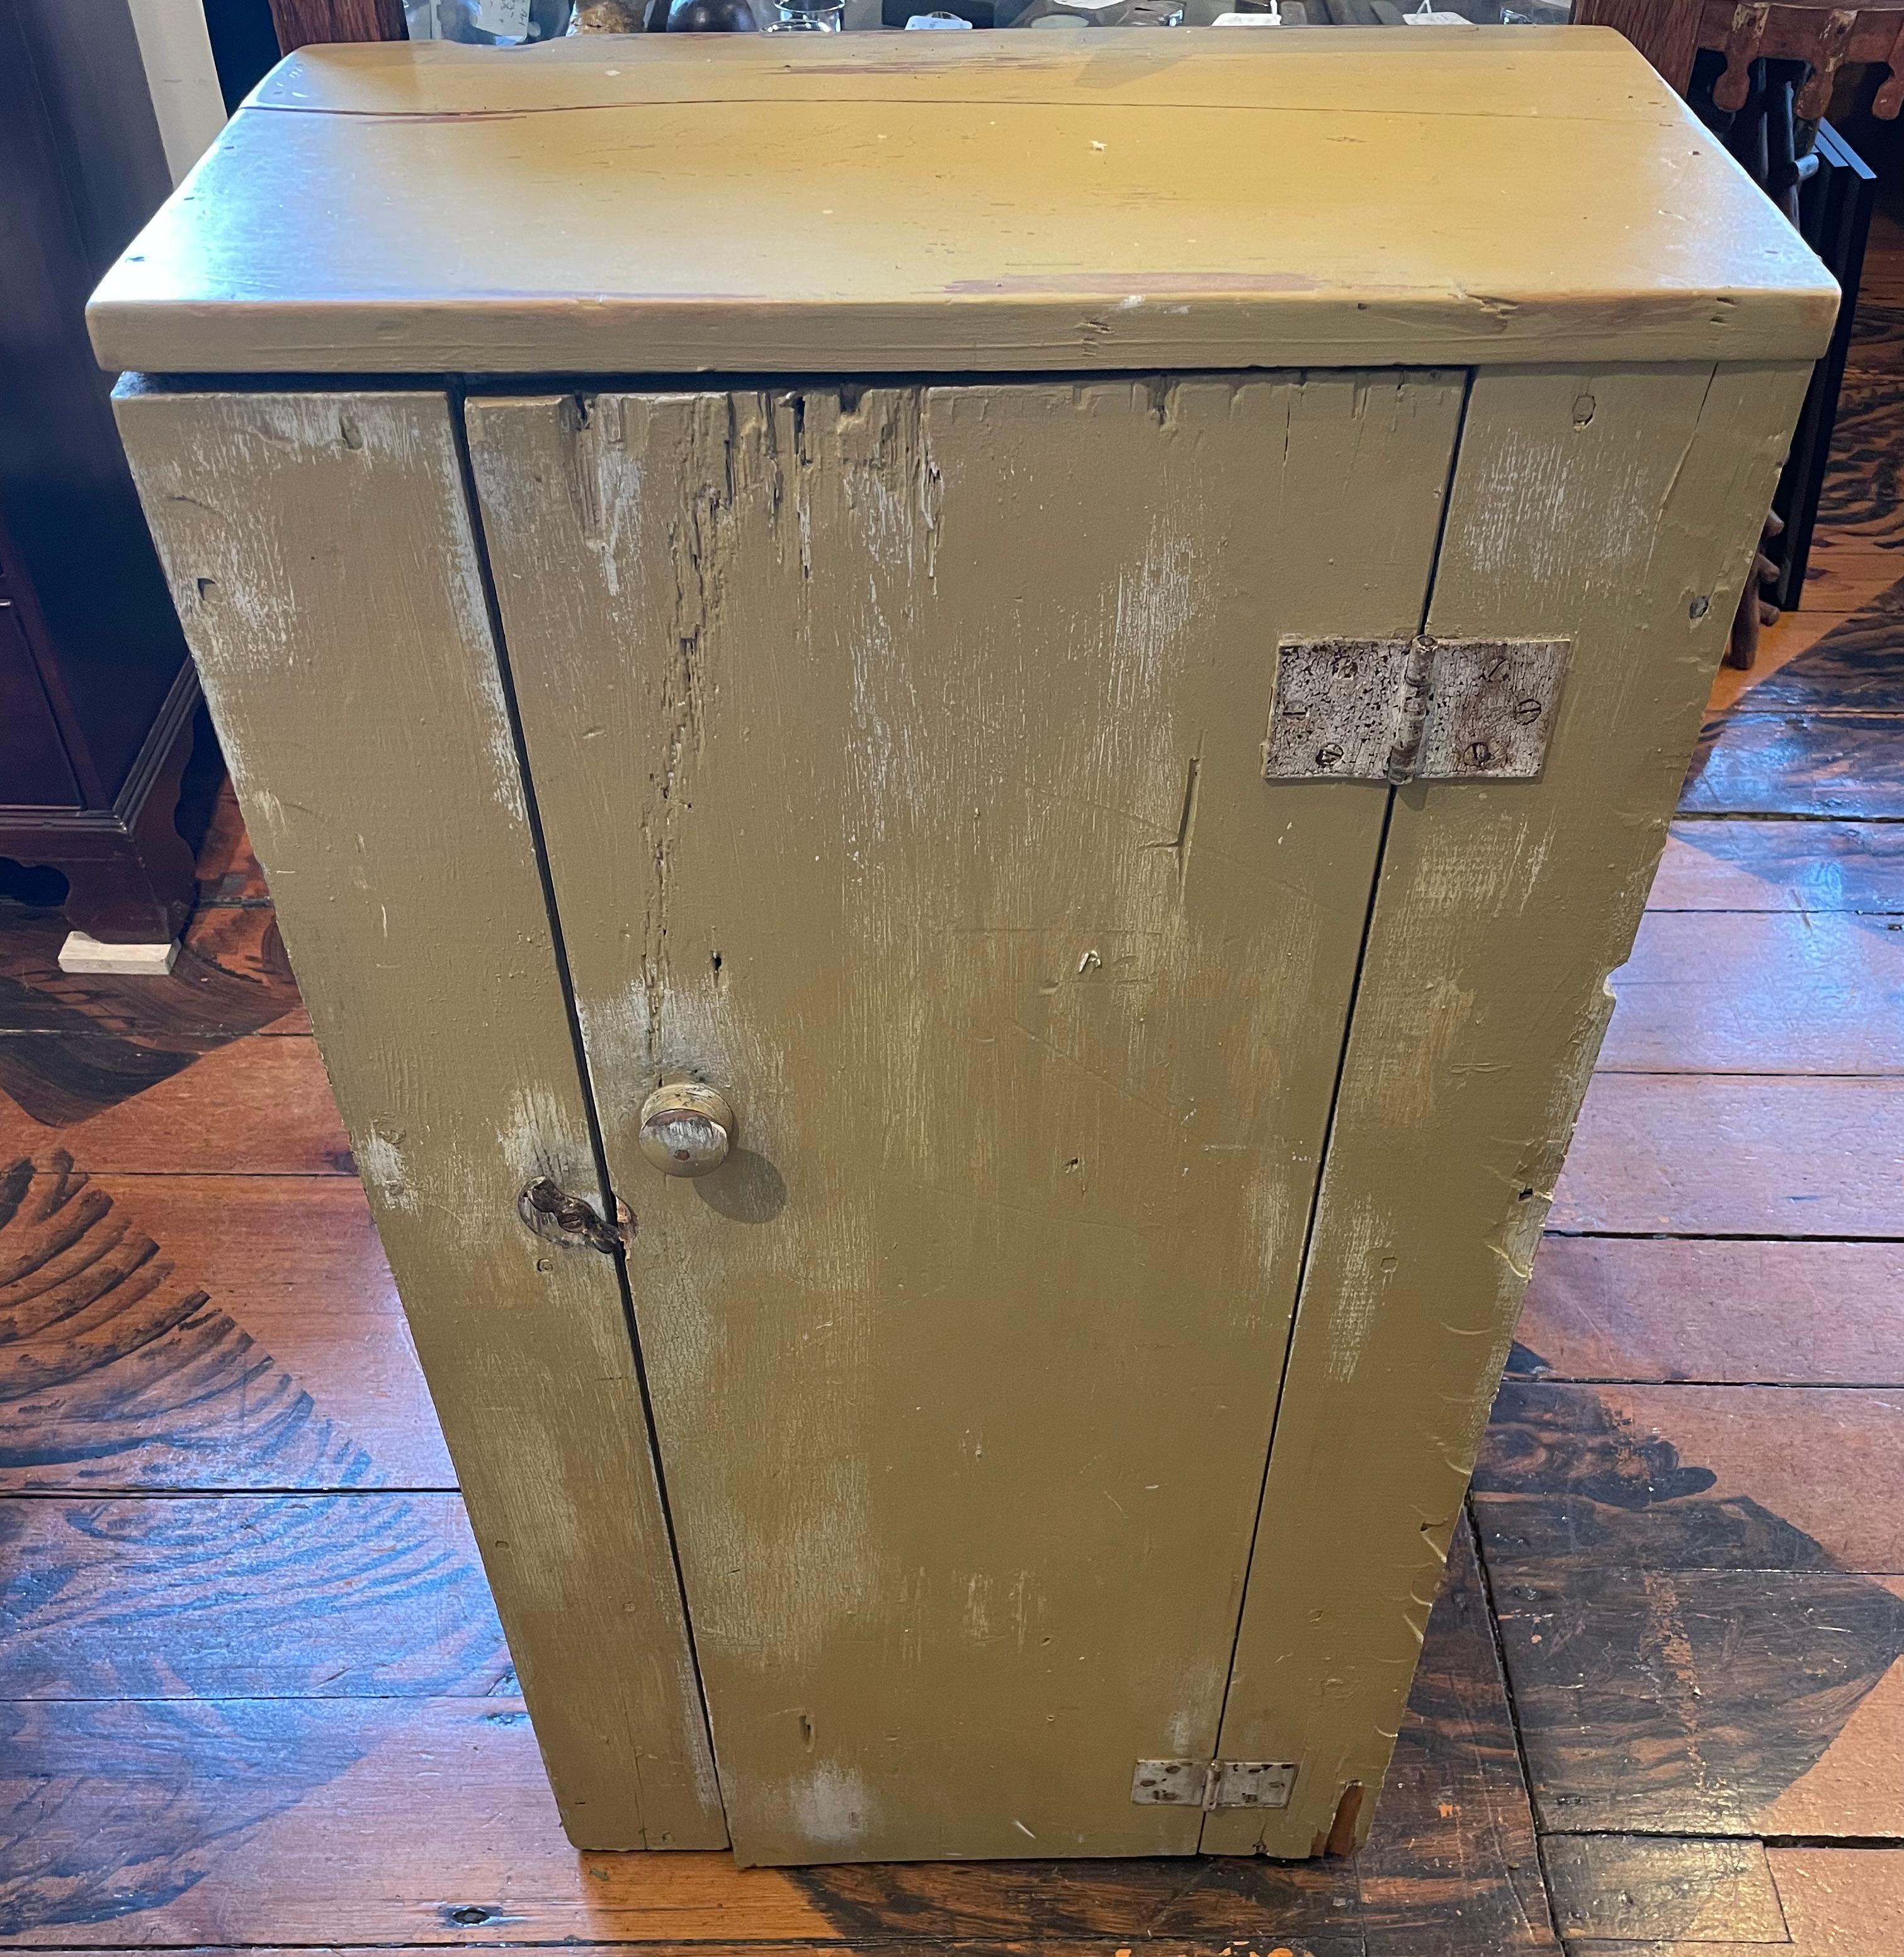 Diminutive rustic jelly jar cupboard, likely homemade, crafted from reclaimed wood. Exterior with mustard yellow/ochre paint, white painted interior with two shelves, iron hinged door 11.75” wide.